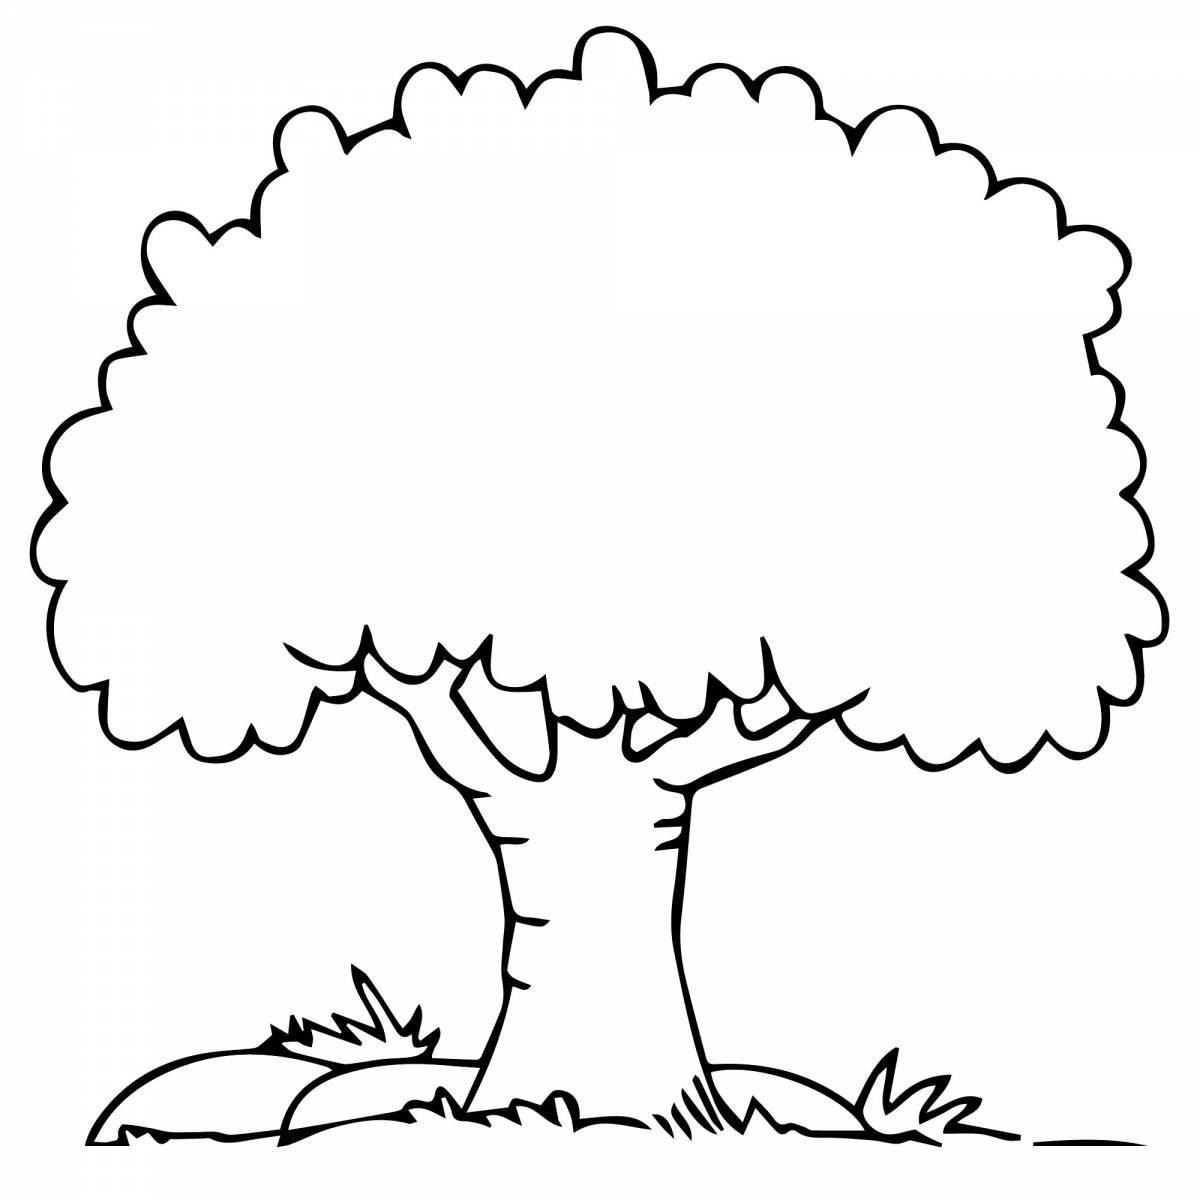 Coloring tree coloring page images for kids